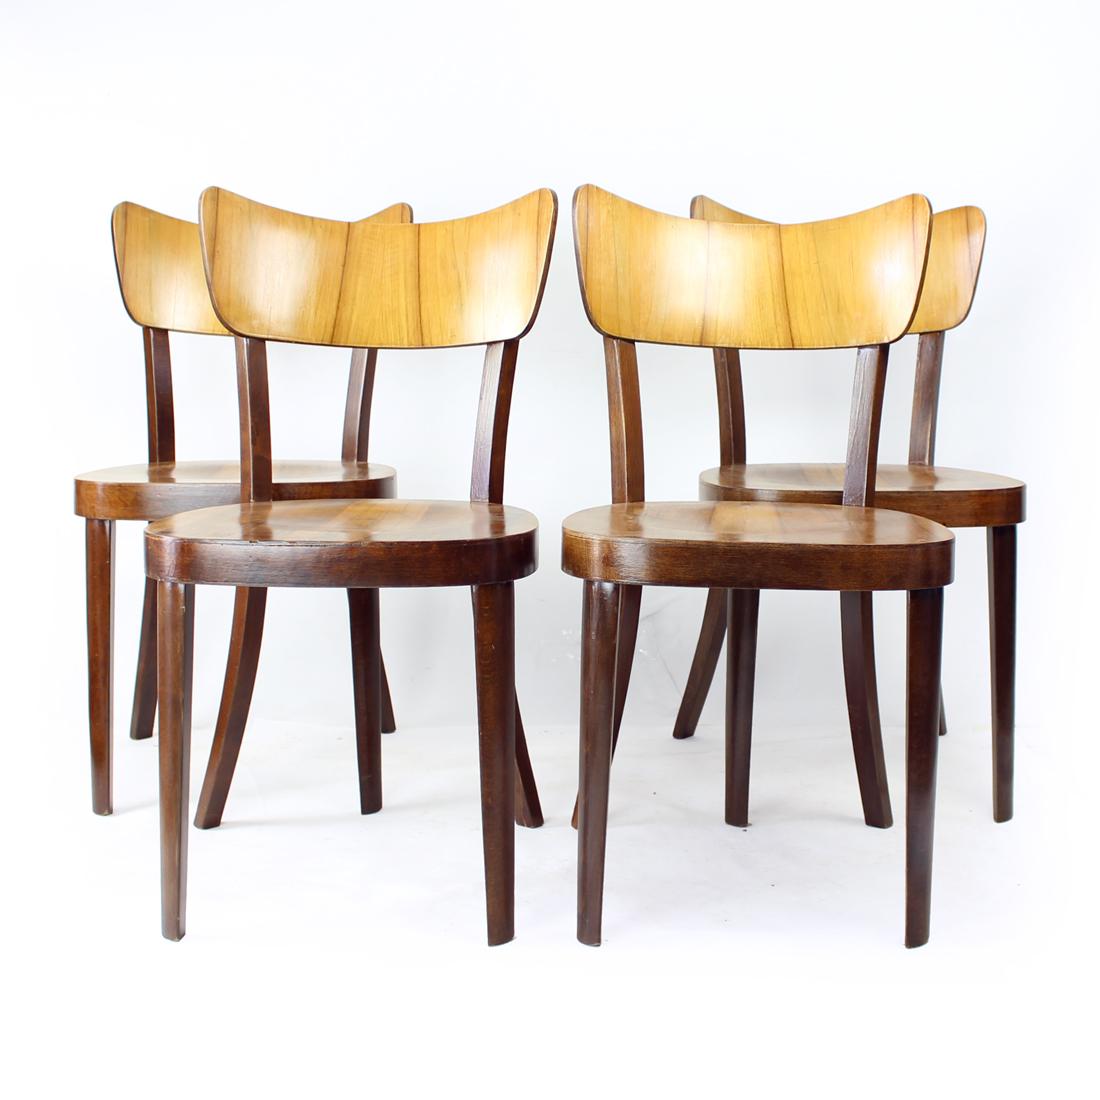 Mid-Century Modern Set Of 4 Dining Chairs By Tatra In Walnut, Czechoslovakia 1950s For Sale